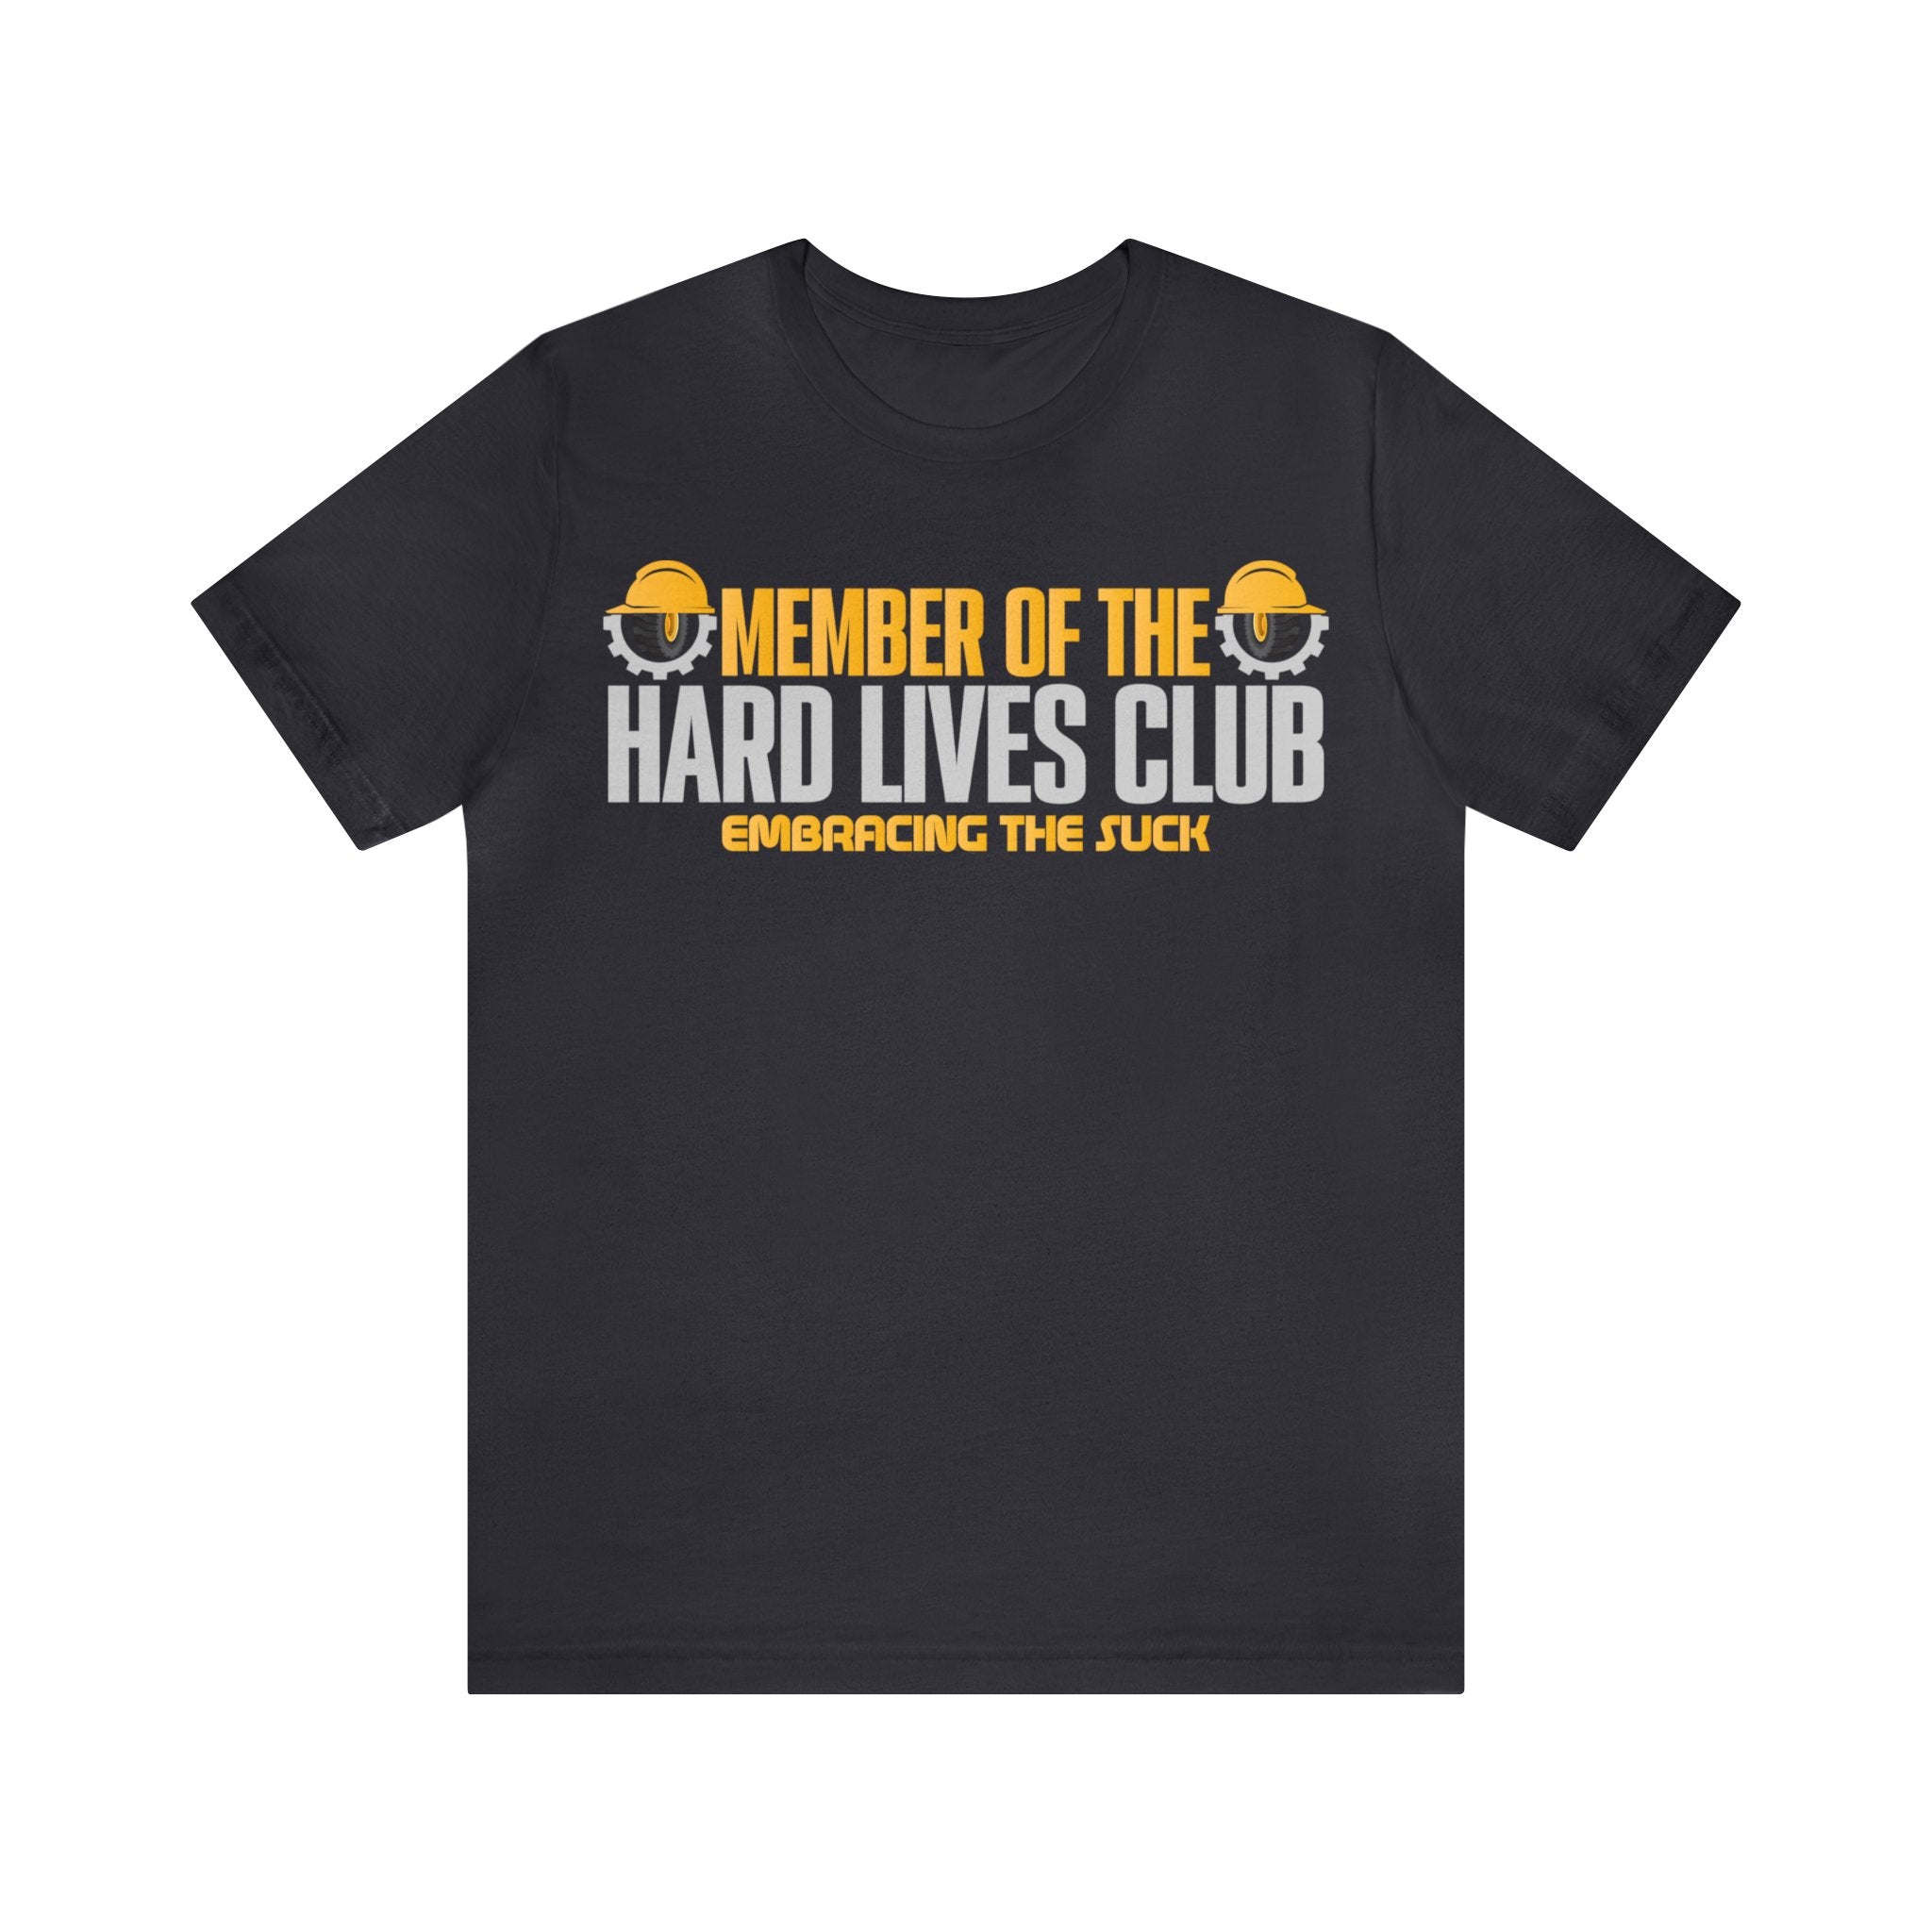 Member of the Hard Lives Club